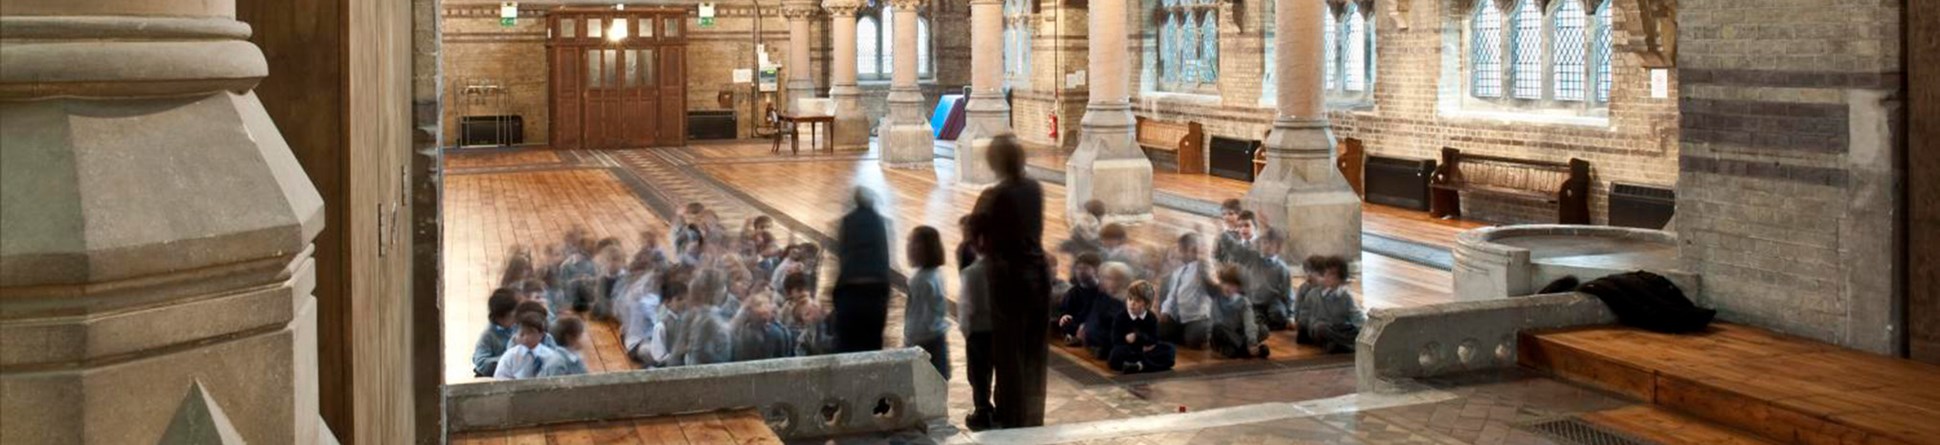 A group of school children sat on the floor of an empty church building which has arches decorated with gold, a runway of tiles in a pattern, carved stonework and a circular stained glass window. The people in the image are blurred by a long exposure and are unidentifiable.